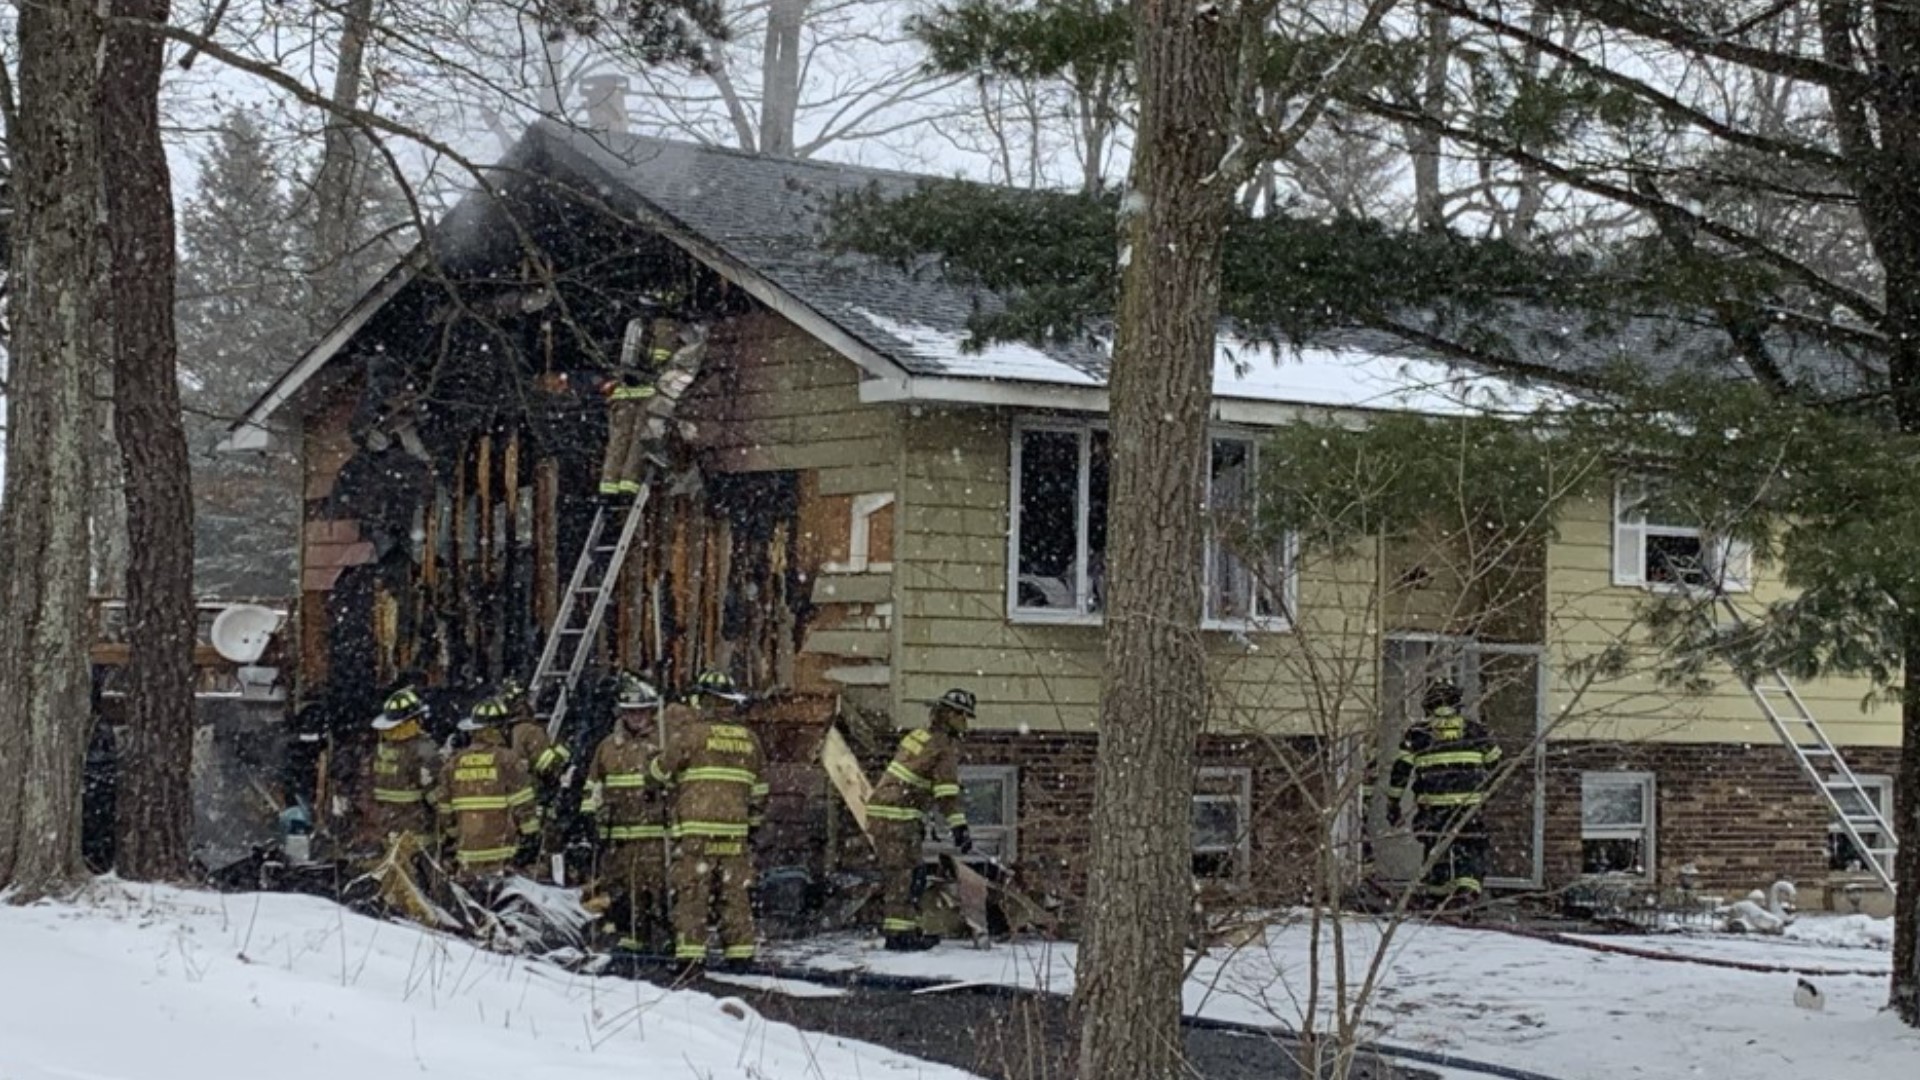 Seven people lived in the apartments in Mount Pocono.